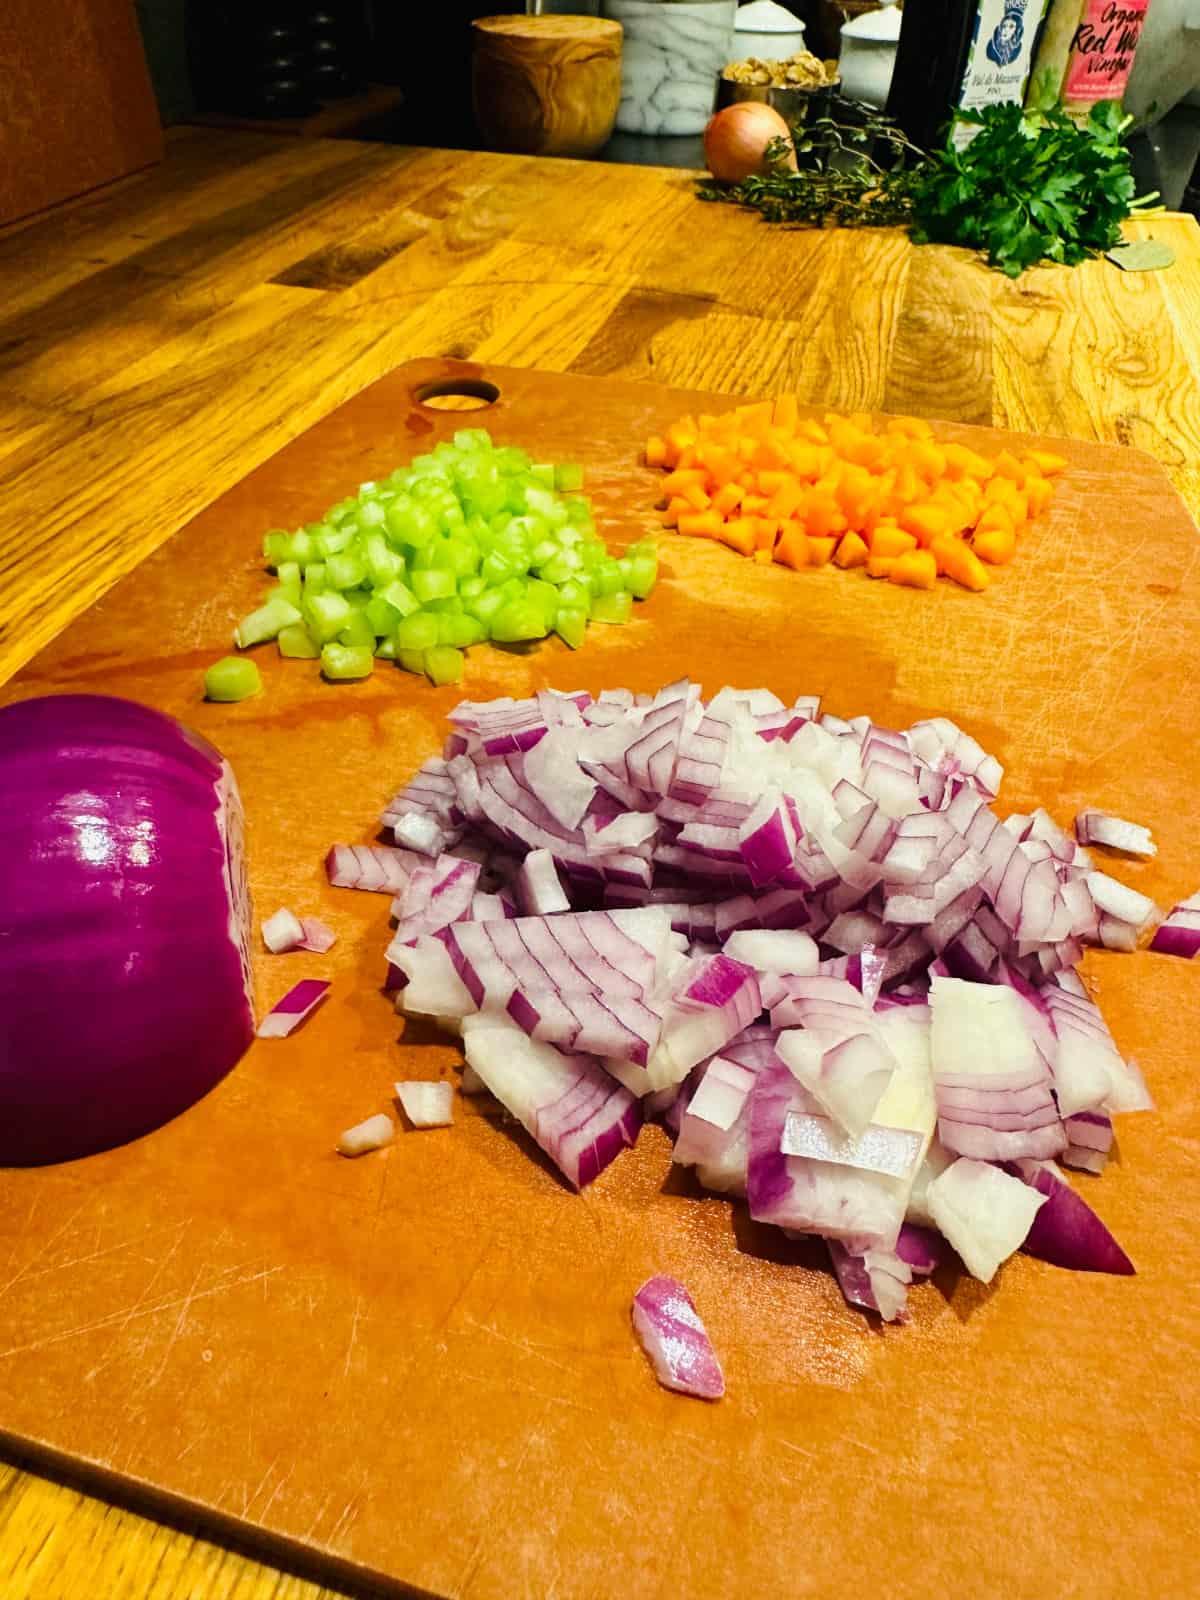 Chopped red onion, celery, and carrot on a wood cutting board.